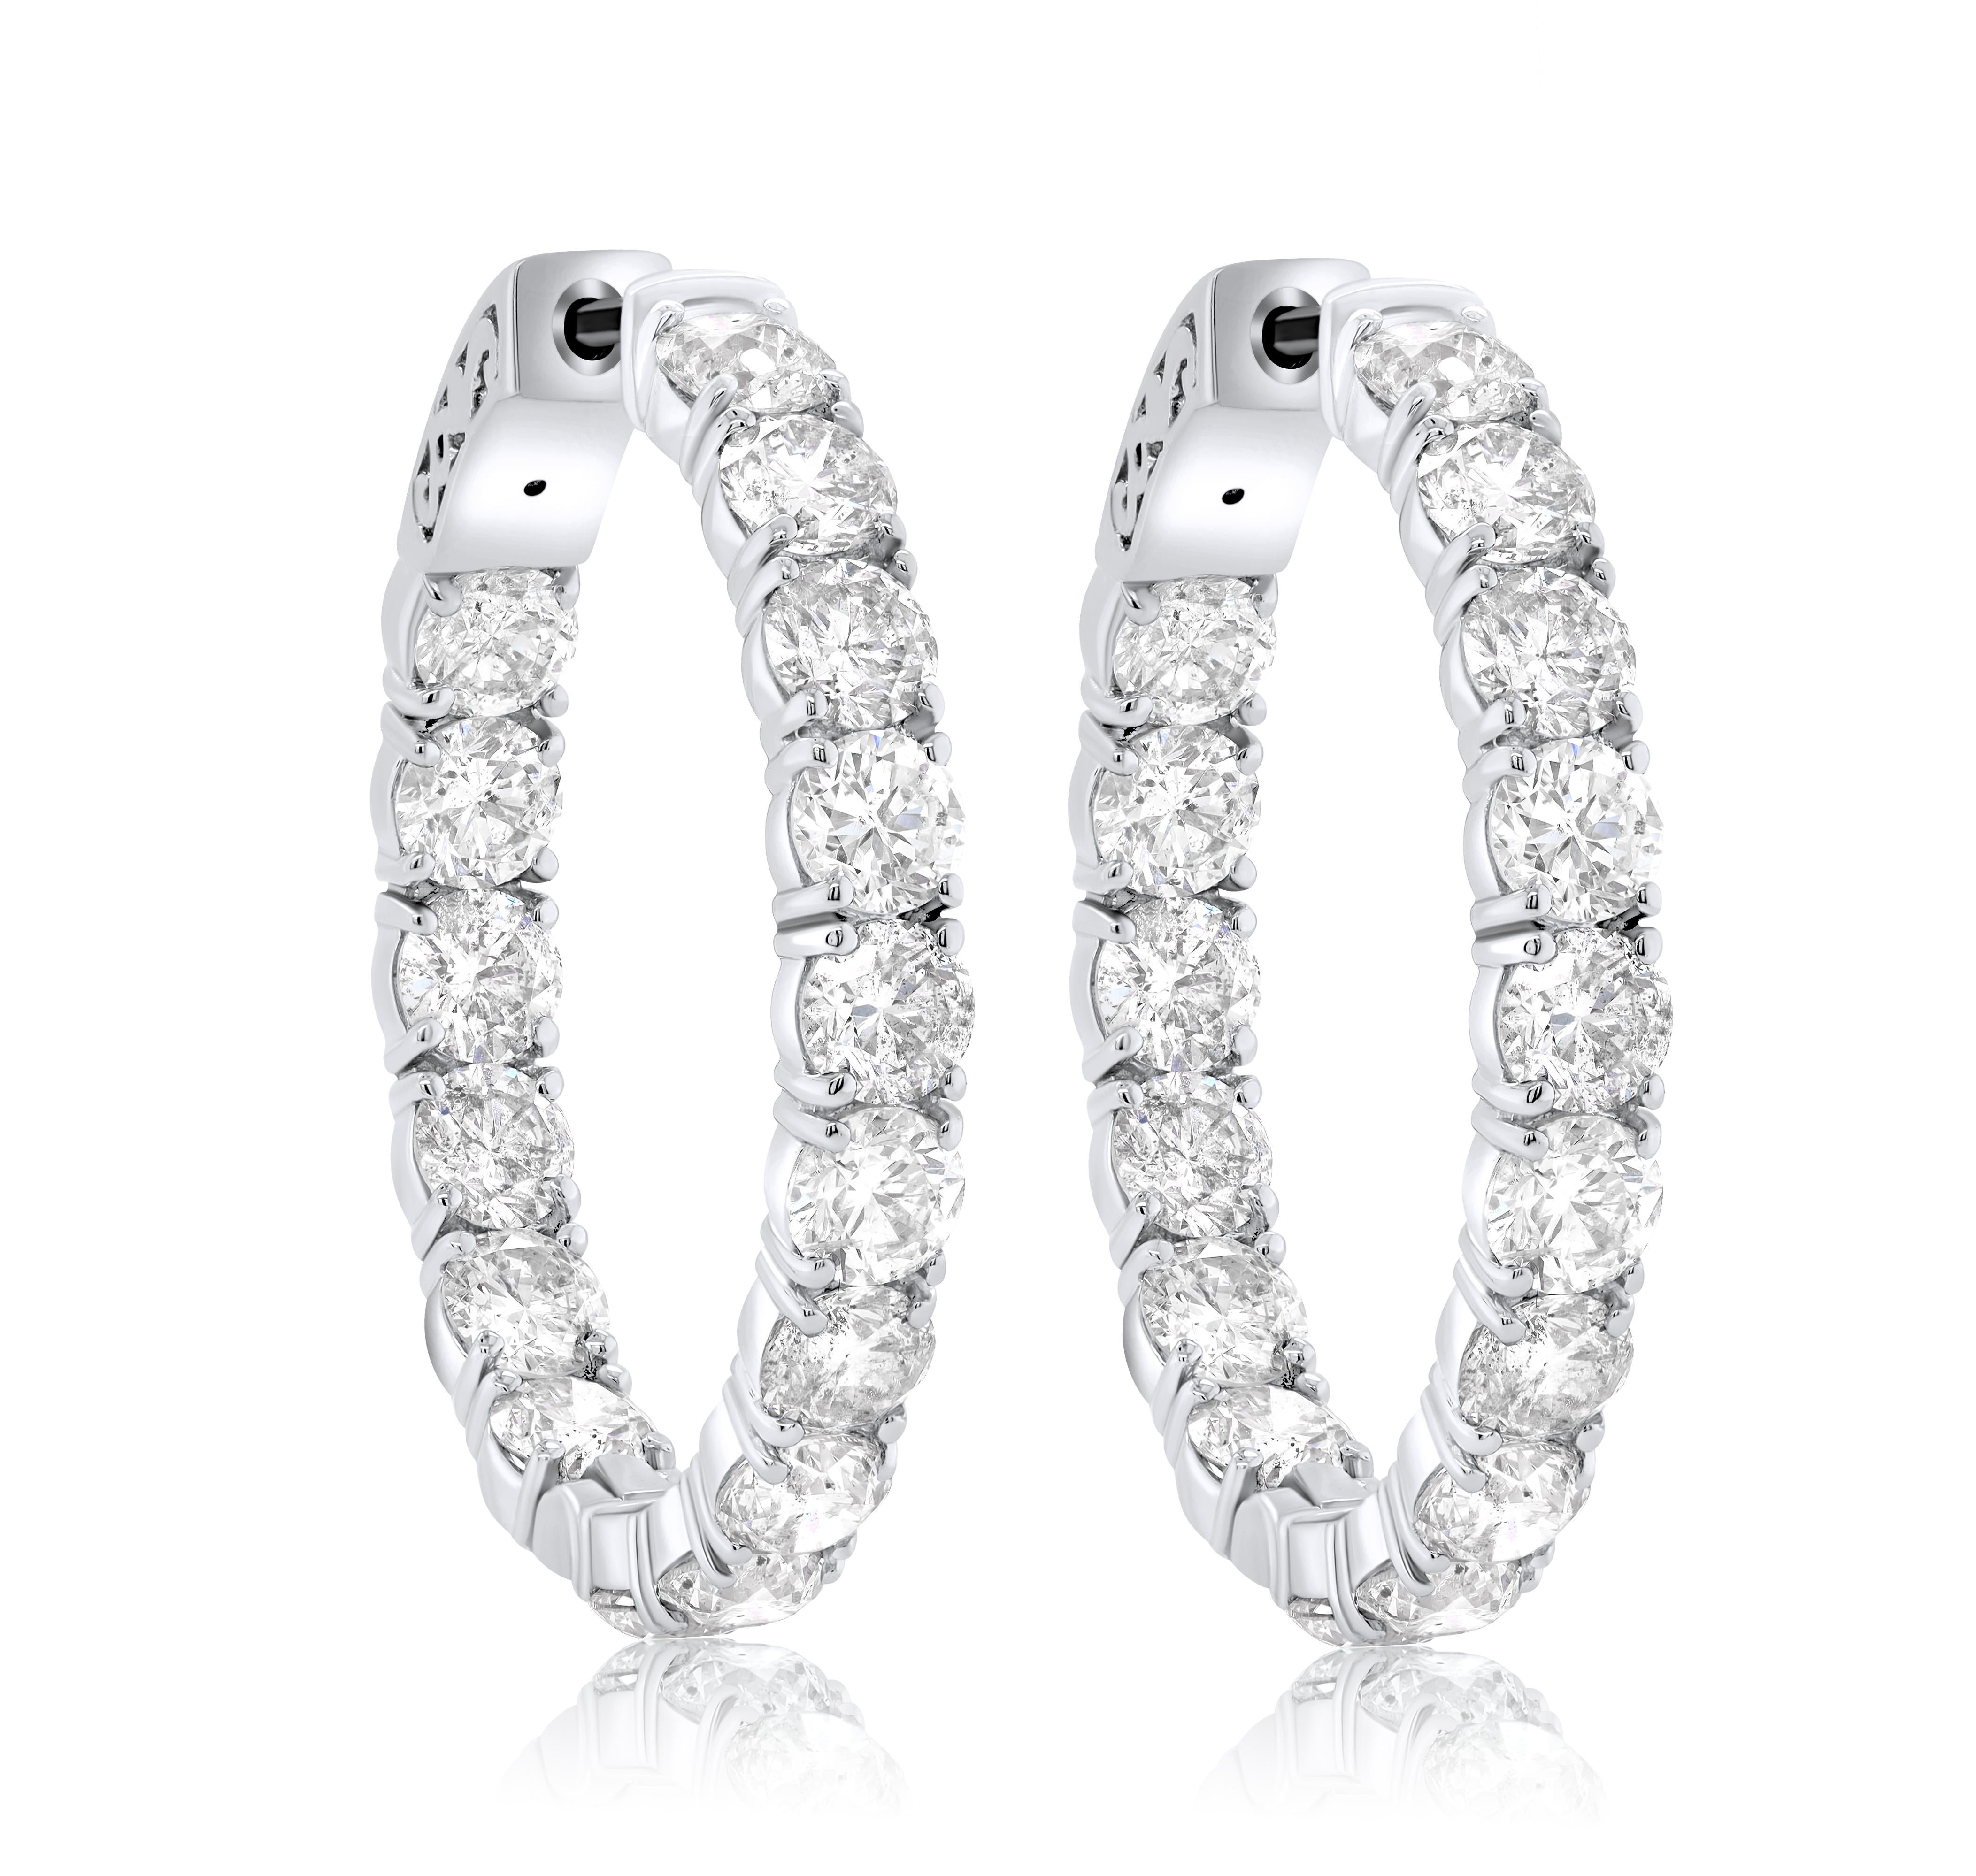 18K White Gold Diamond Earrings featuring 10.00 Carat T.W. of Natural Diamonds

Underline your look with this sharp 18K White Gold Diamond Earrings. High quality Diamonds. This Earrings will underline your exquisite look for any occasion.

. is a